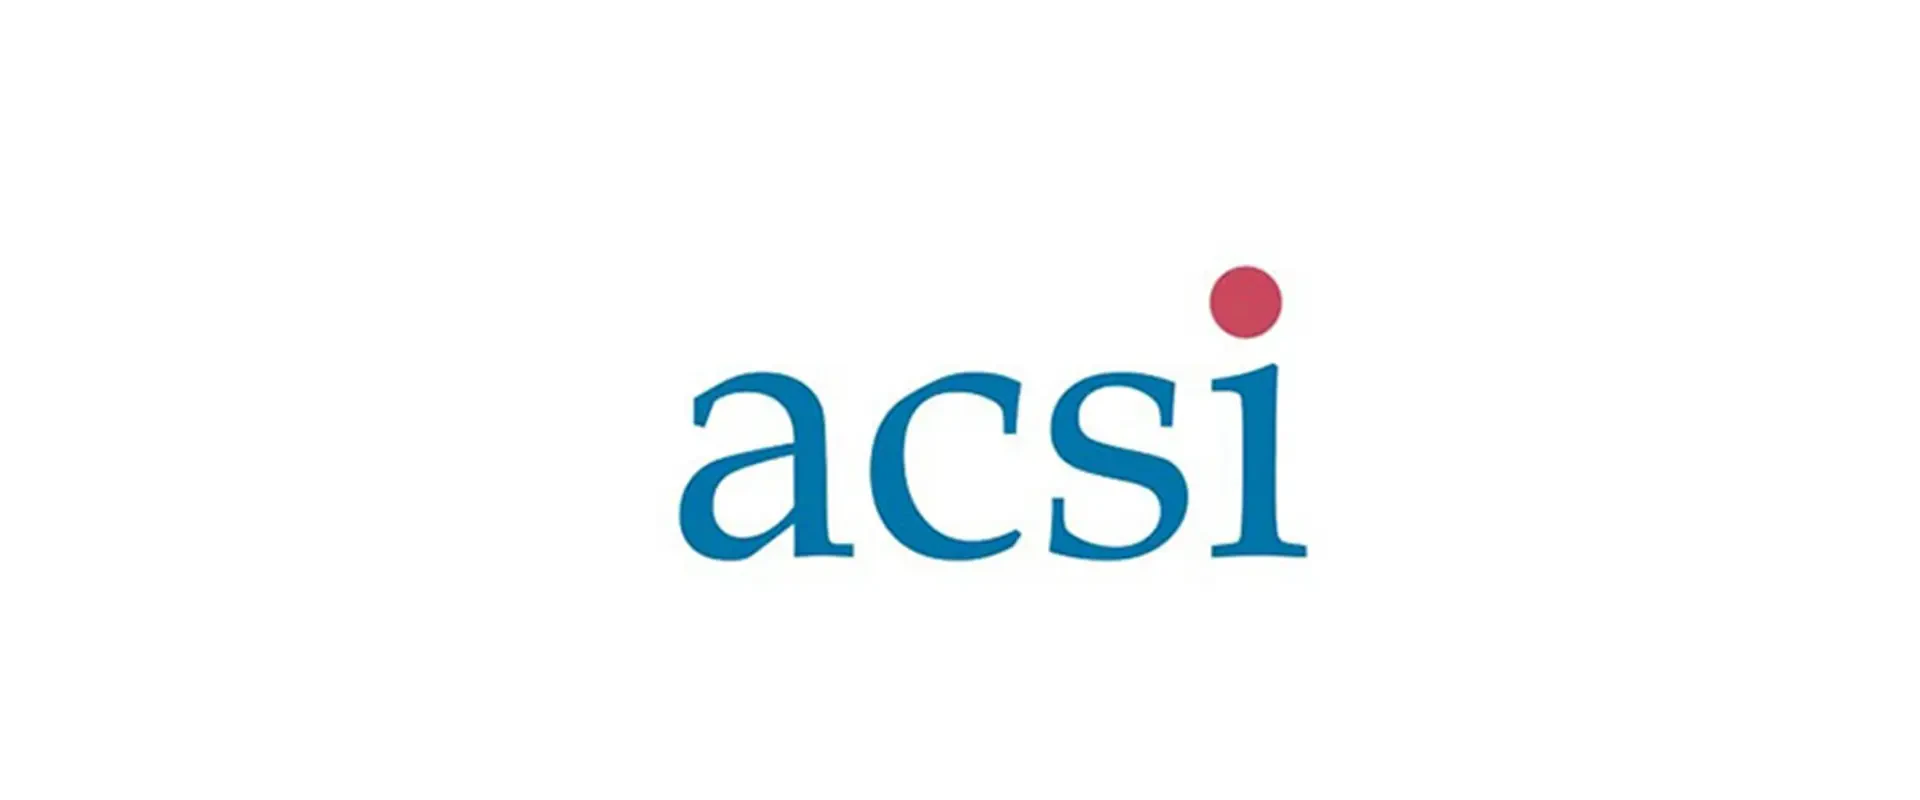 UPDATES TO THE 2019 ACSI GOVERNANCE GUIDELINES